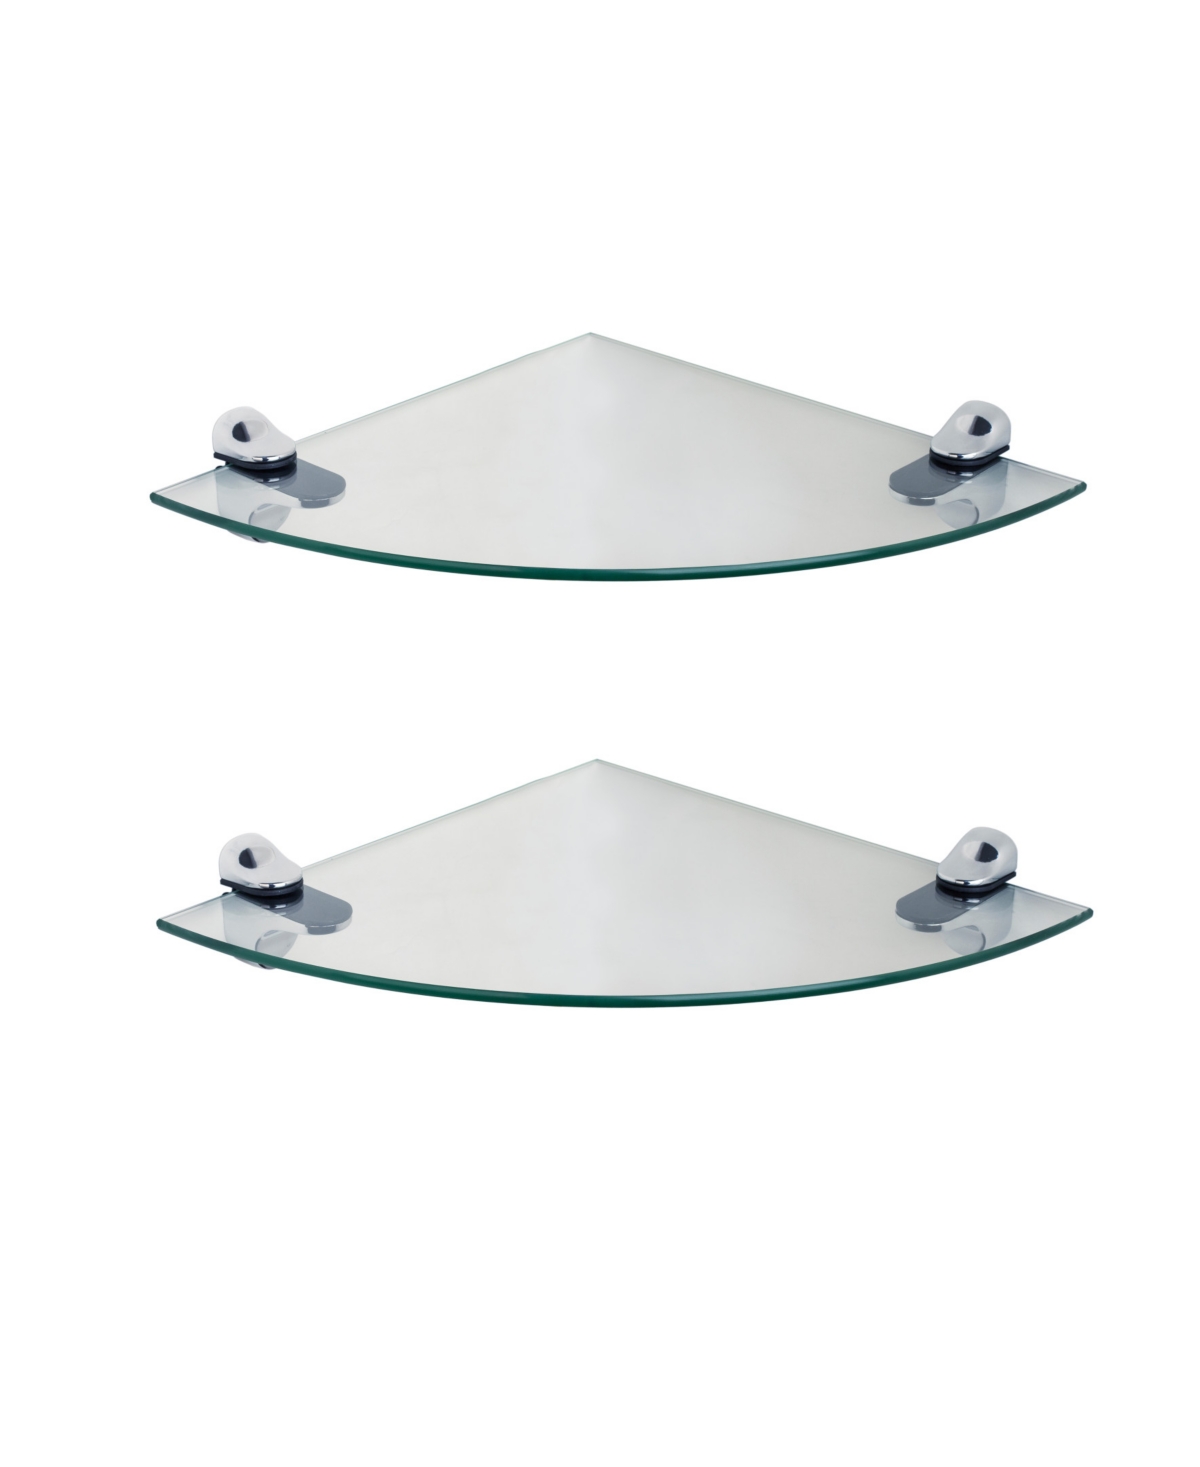 Set of 2 Glass Radial Floating Shelves with Chrome Brackets 10" x 10" - Clear